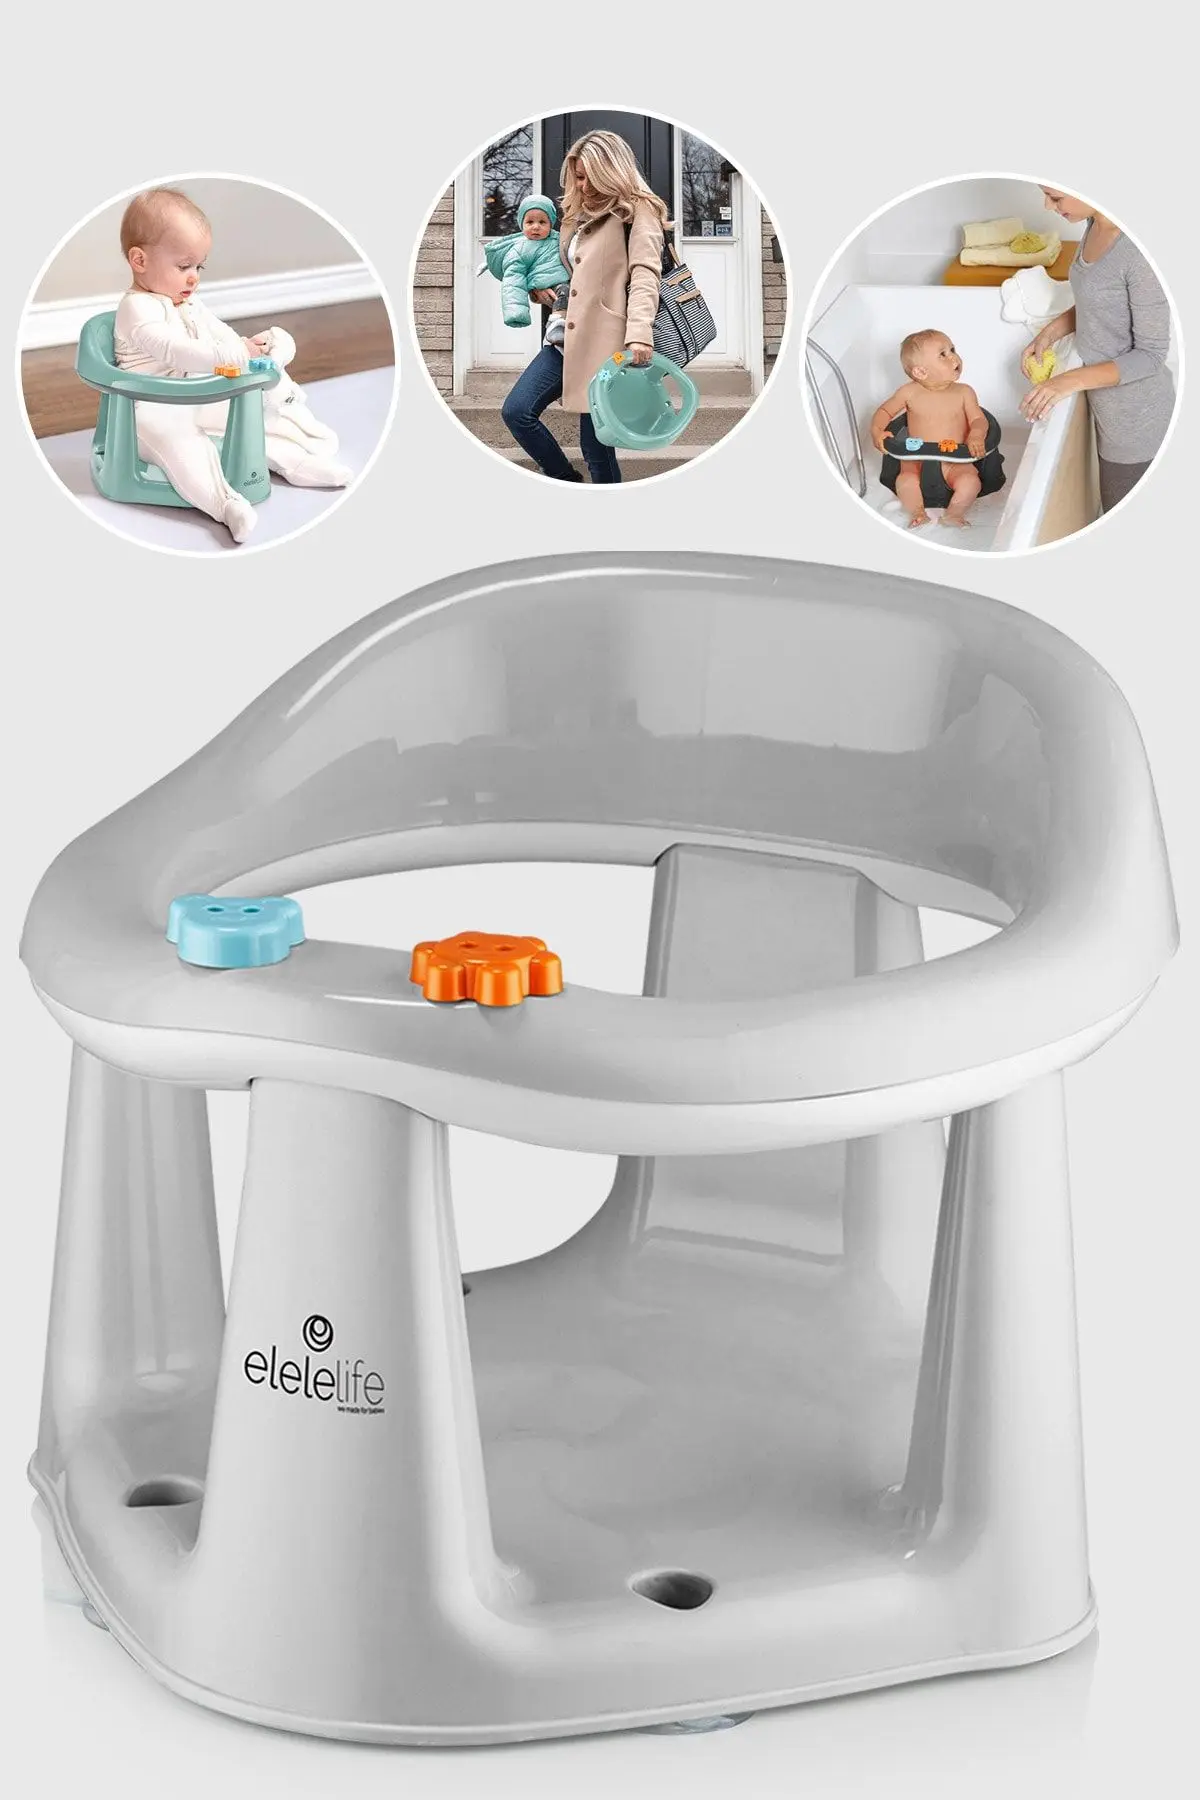 Baby Bath Seat and Baby Food Seat